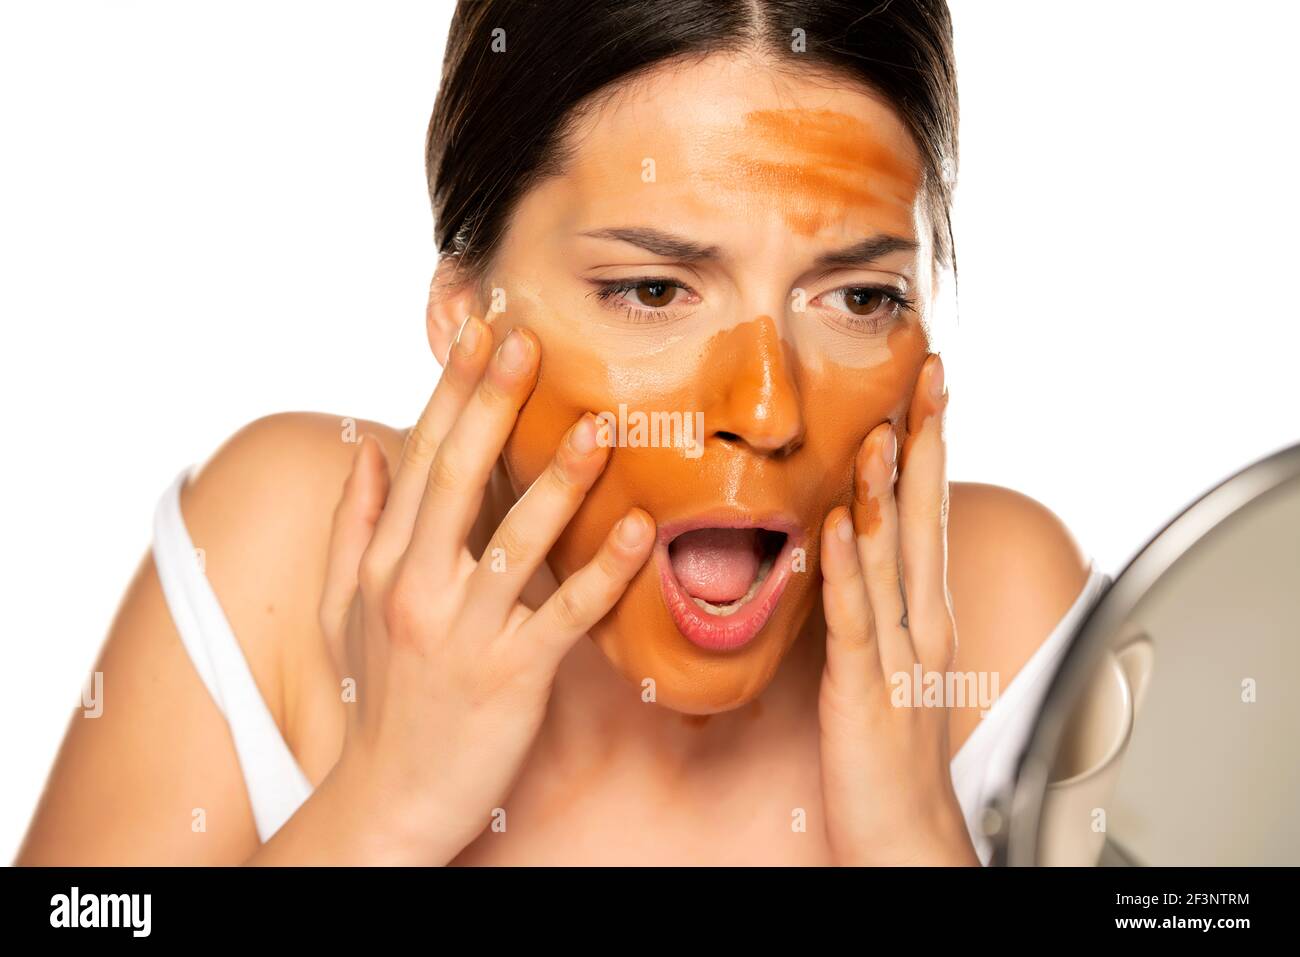 Young shocked woman with wrong makeup base on her face on white background Stock Photo